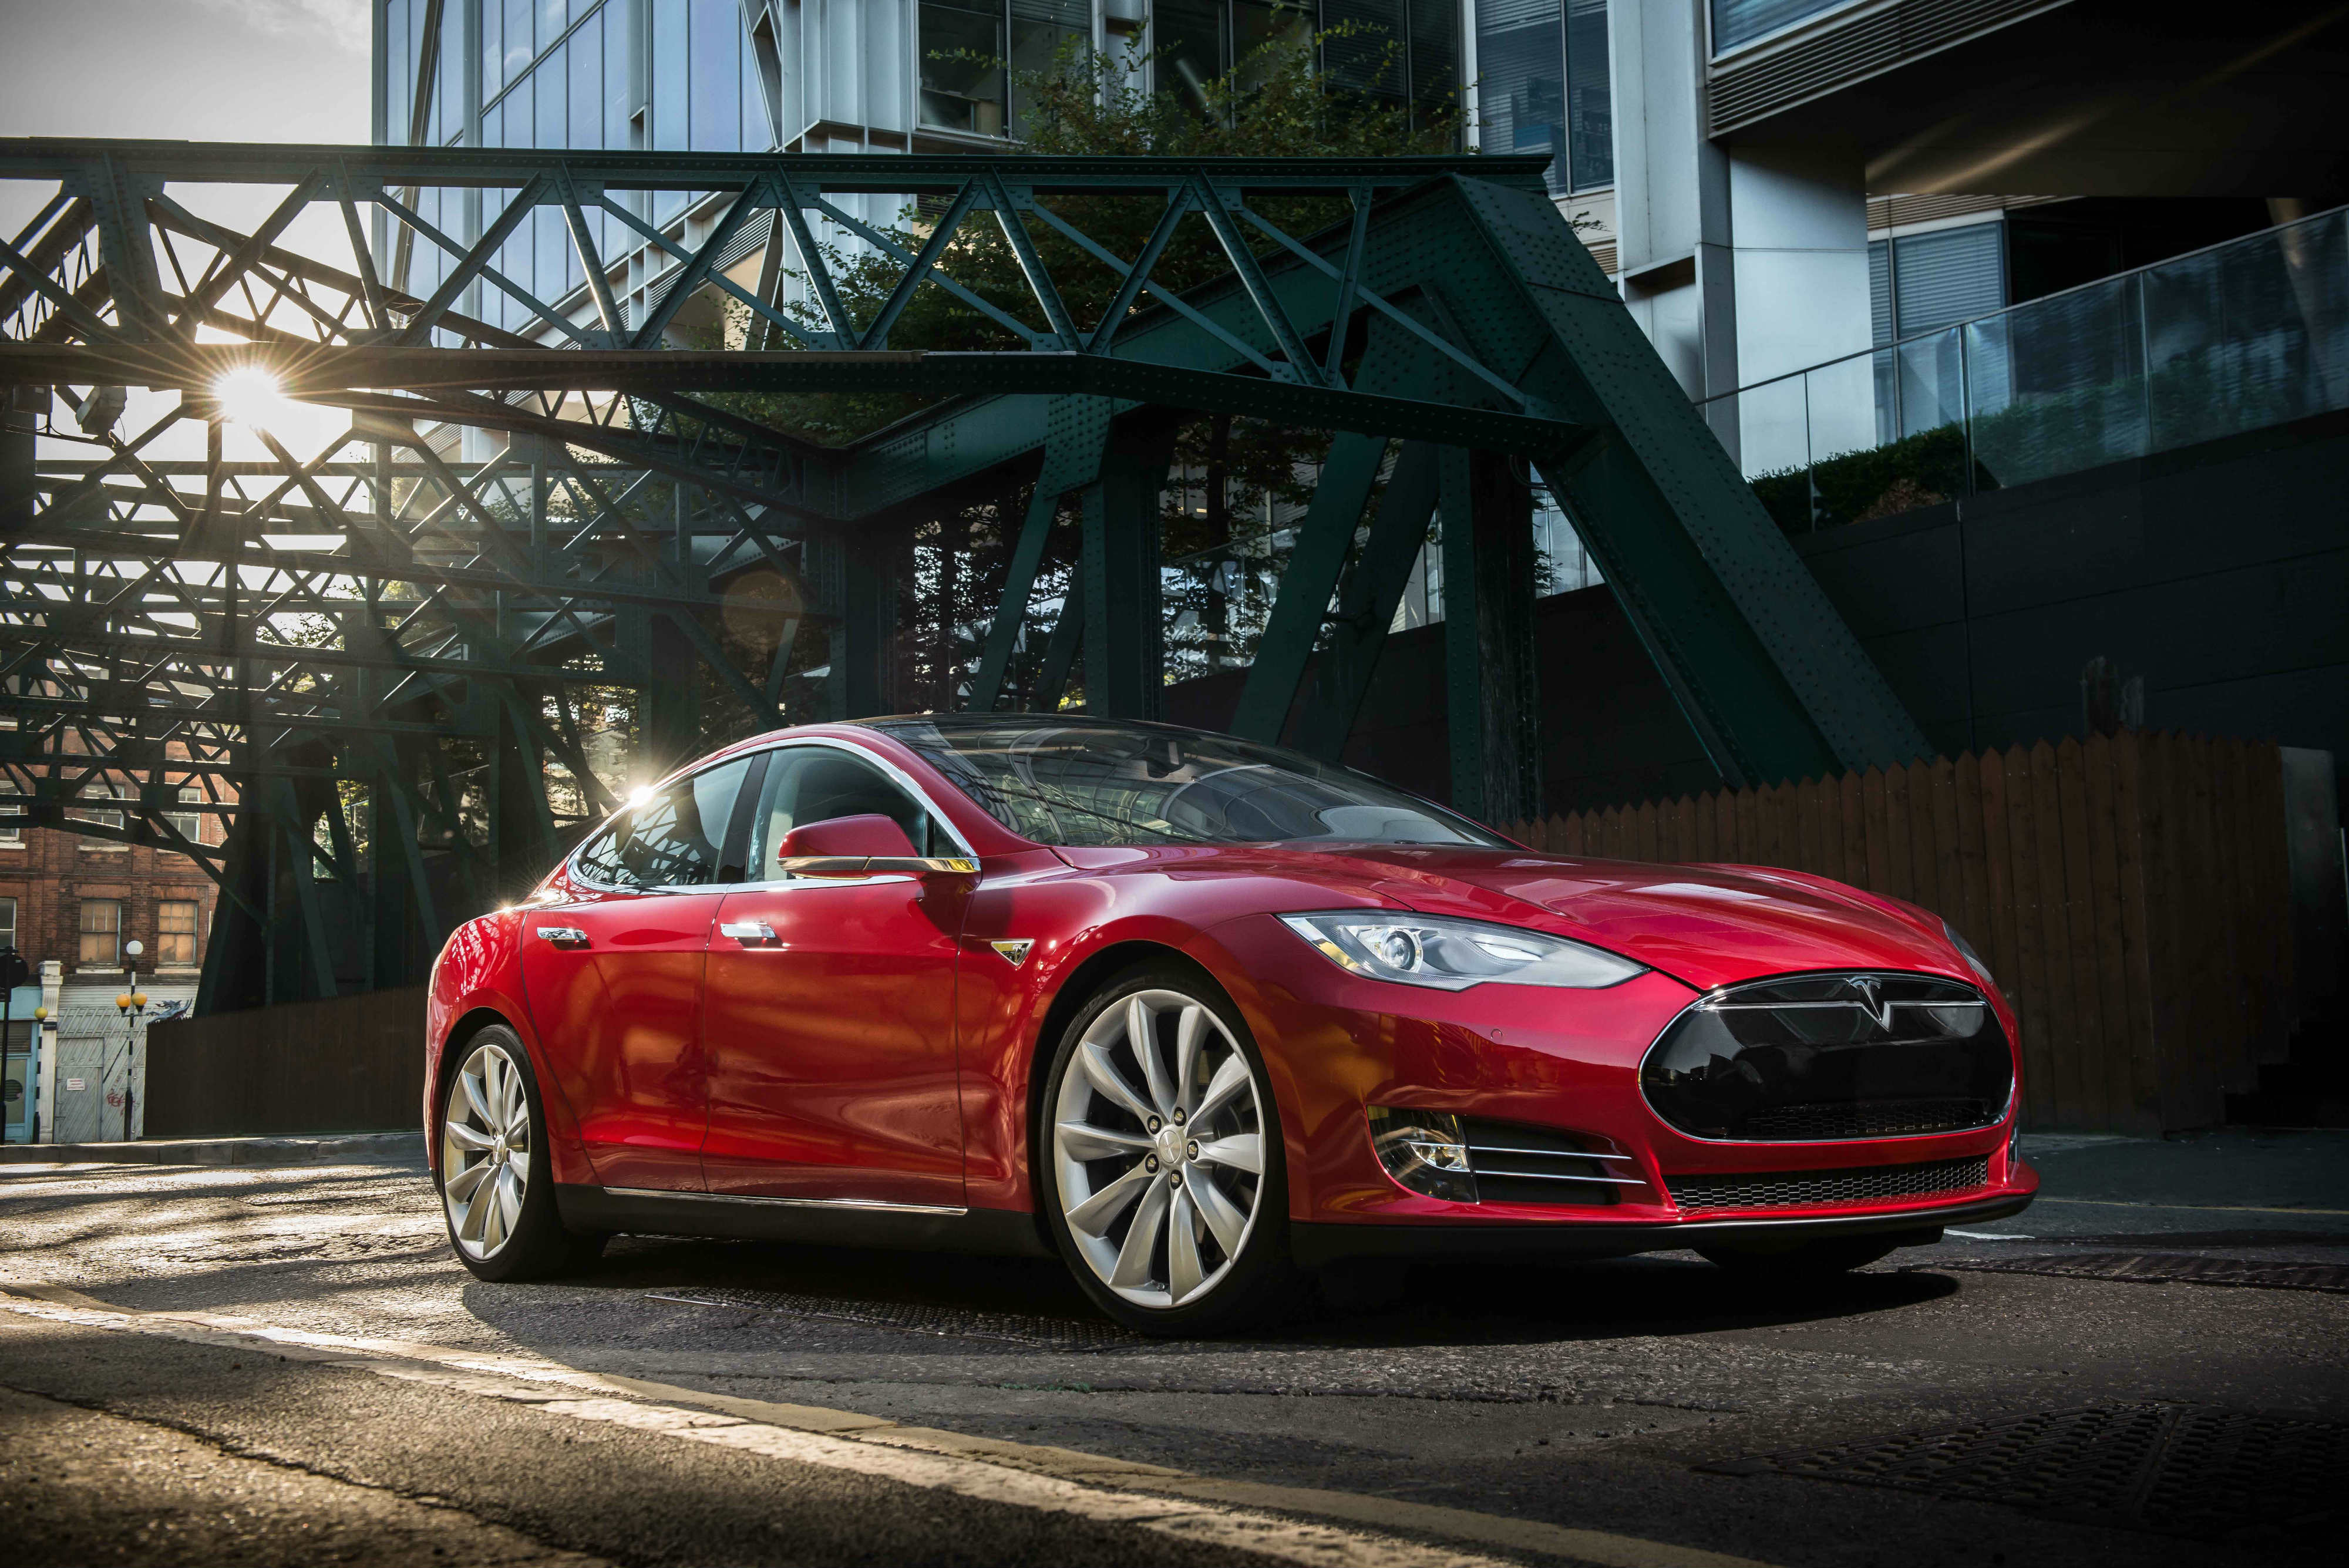 Review of the 2015 Tesla Model S Autopilot self-driving feature